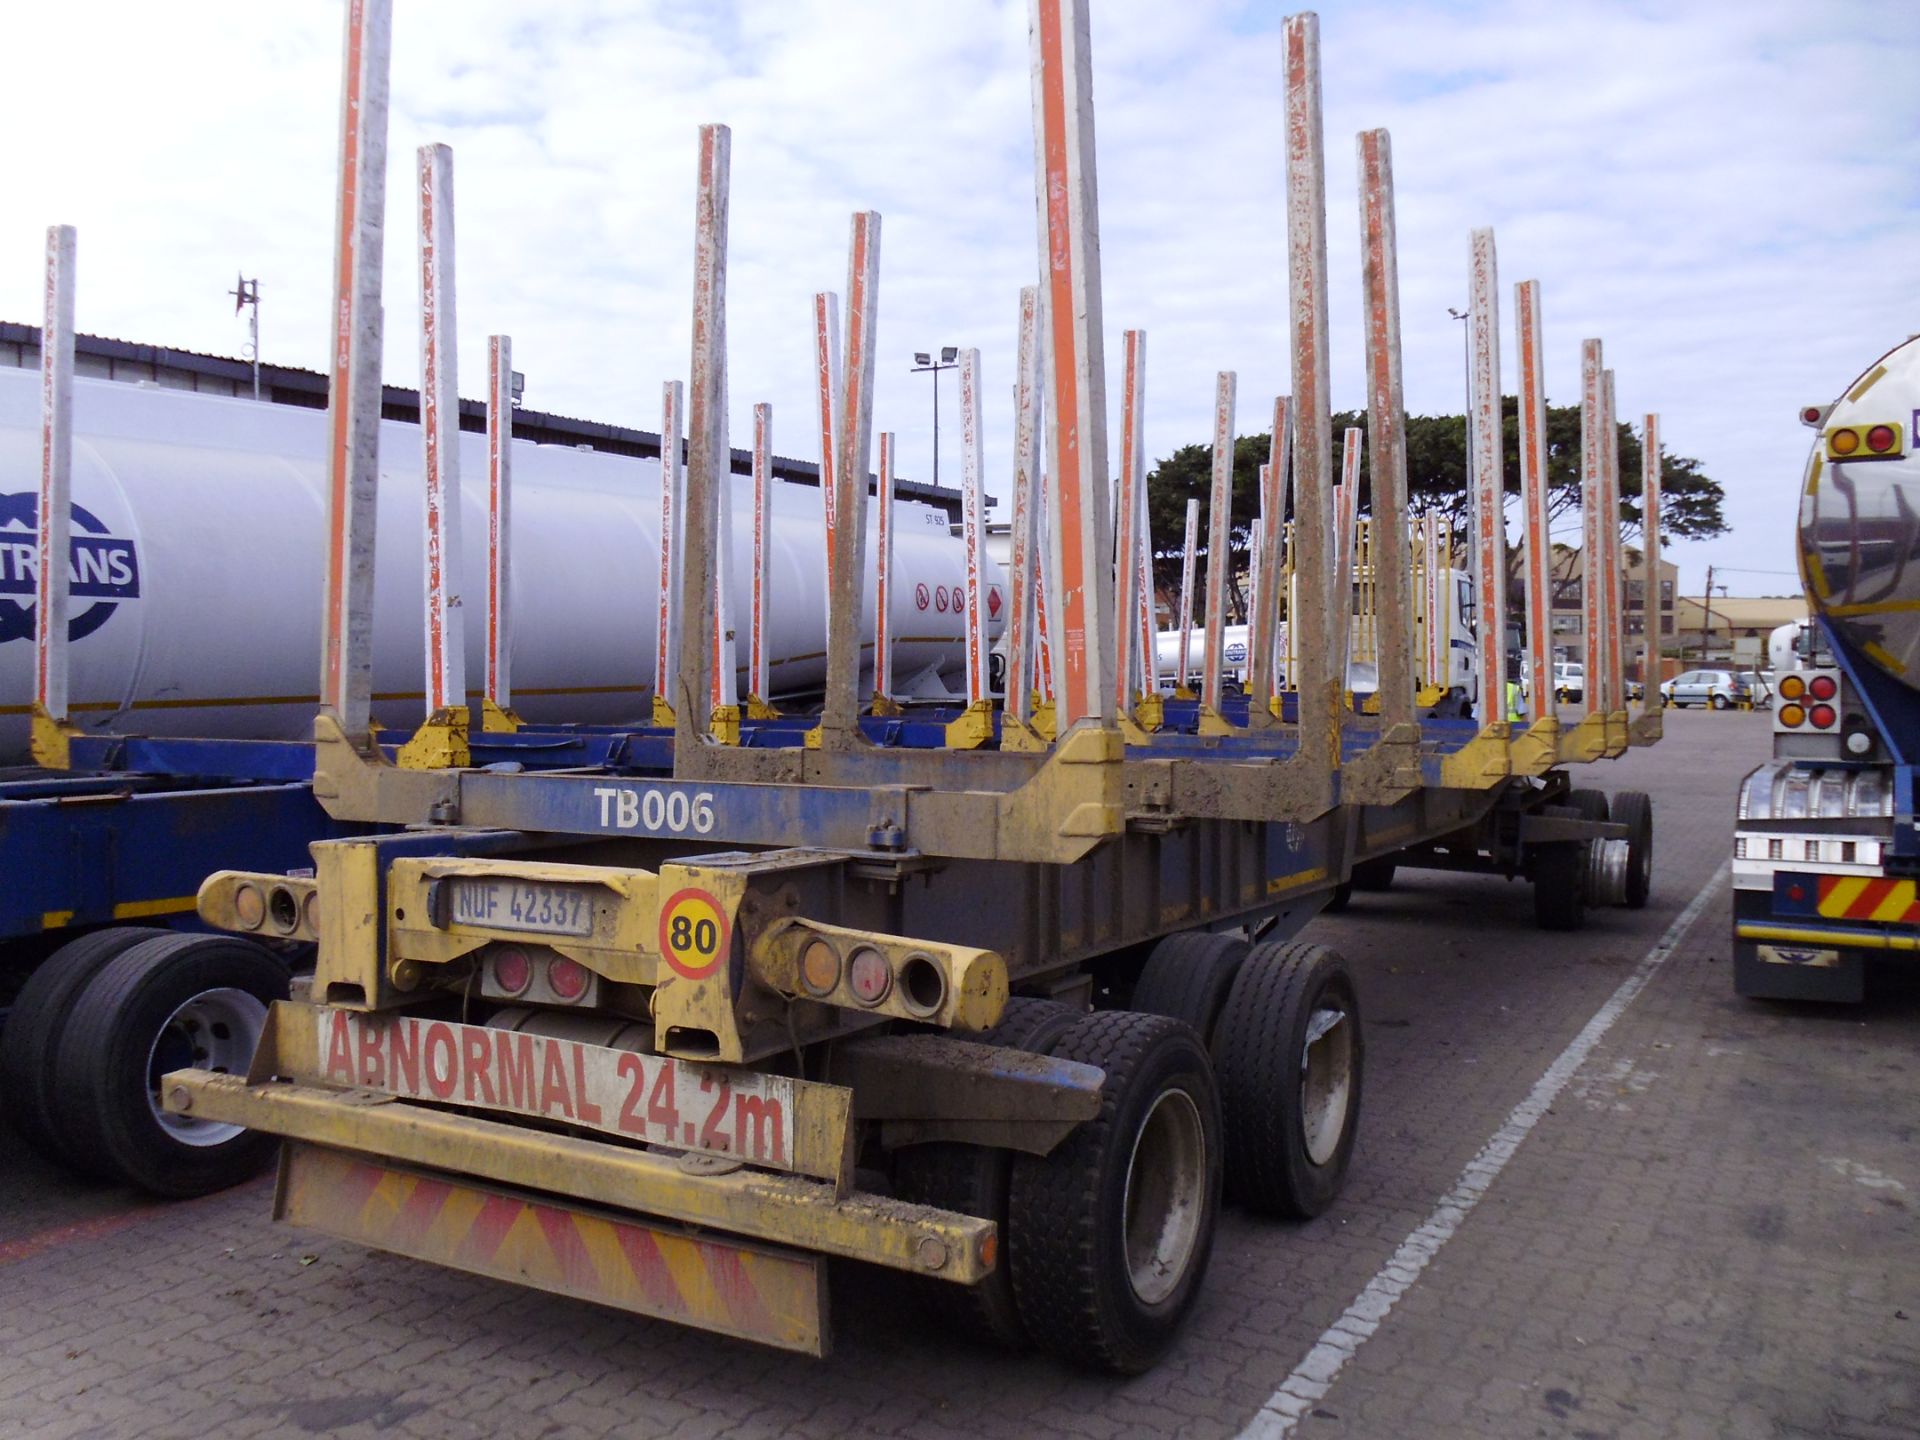 2011 TOHF 4 AXLE TIMBER D/BAR NUF42337 - (TDB006) - LOCATION KZN - Subject to Confirmation - Image 3 of 5